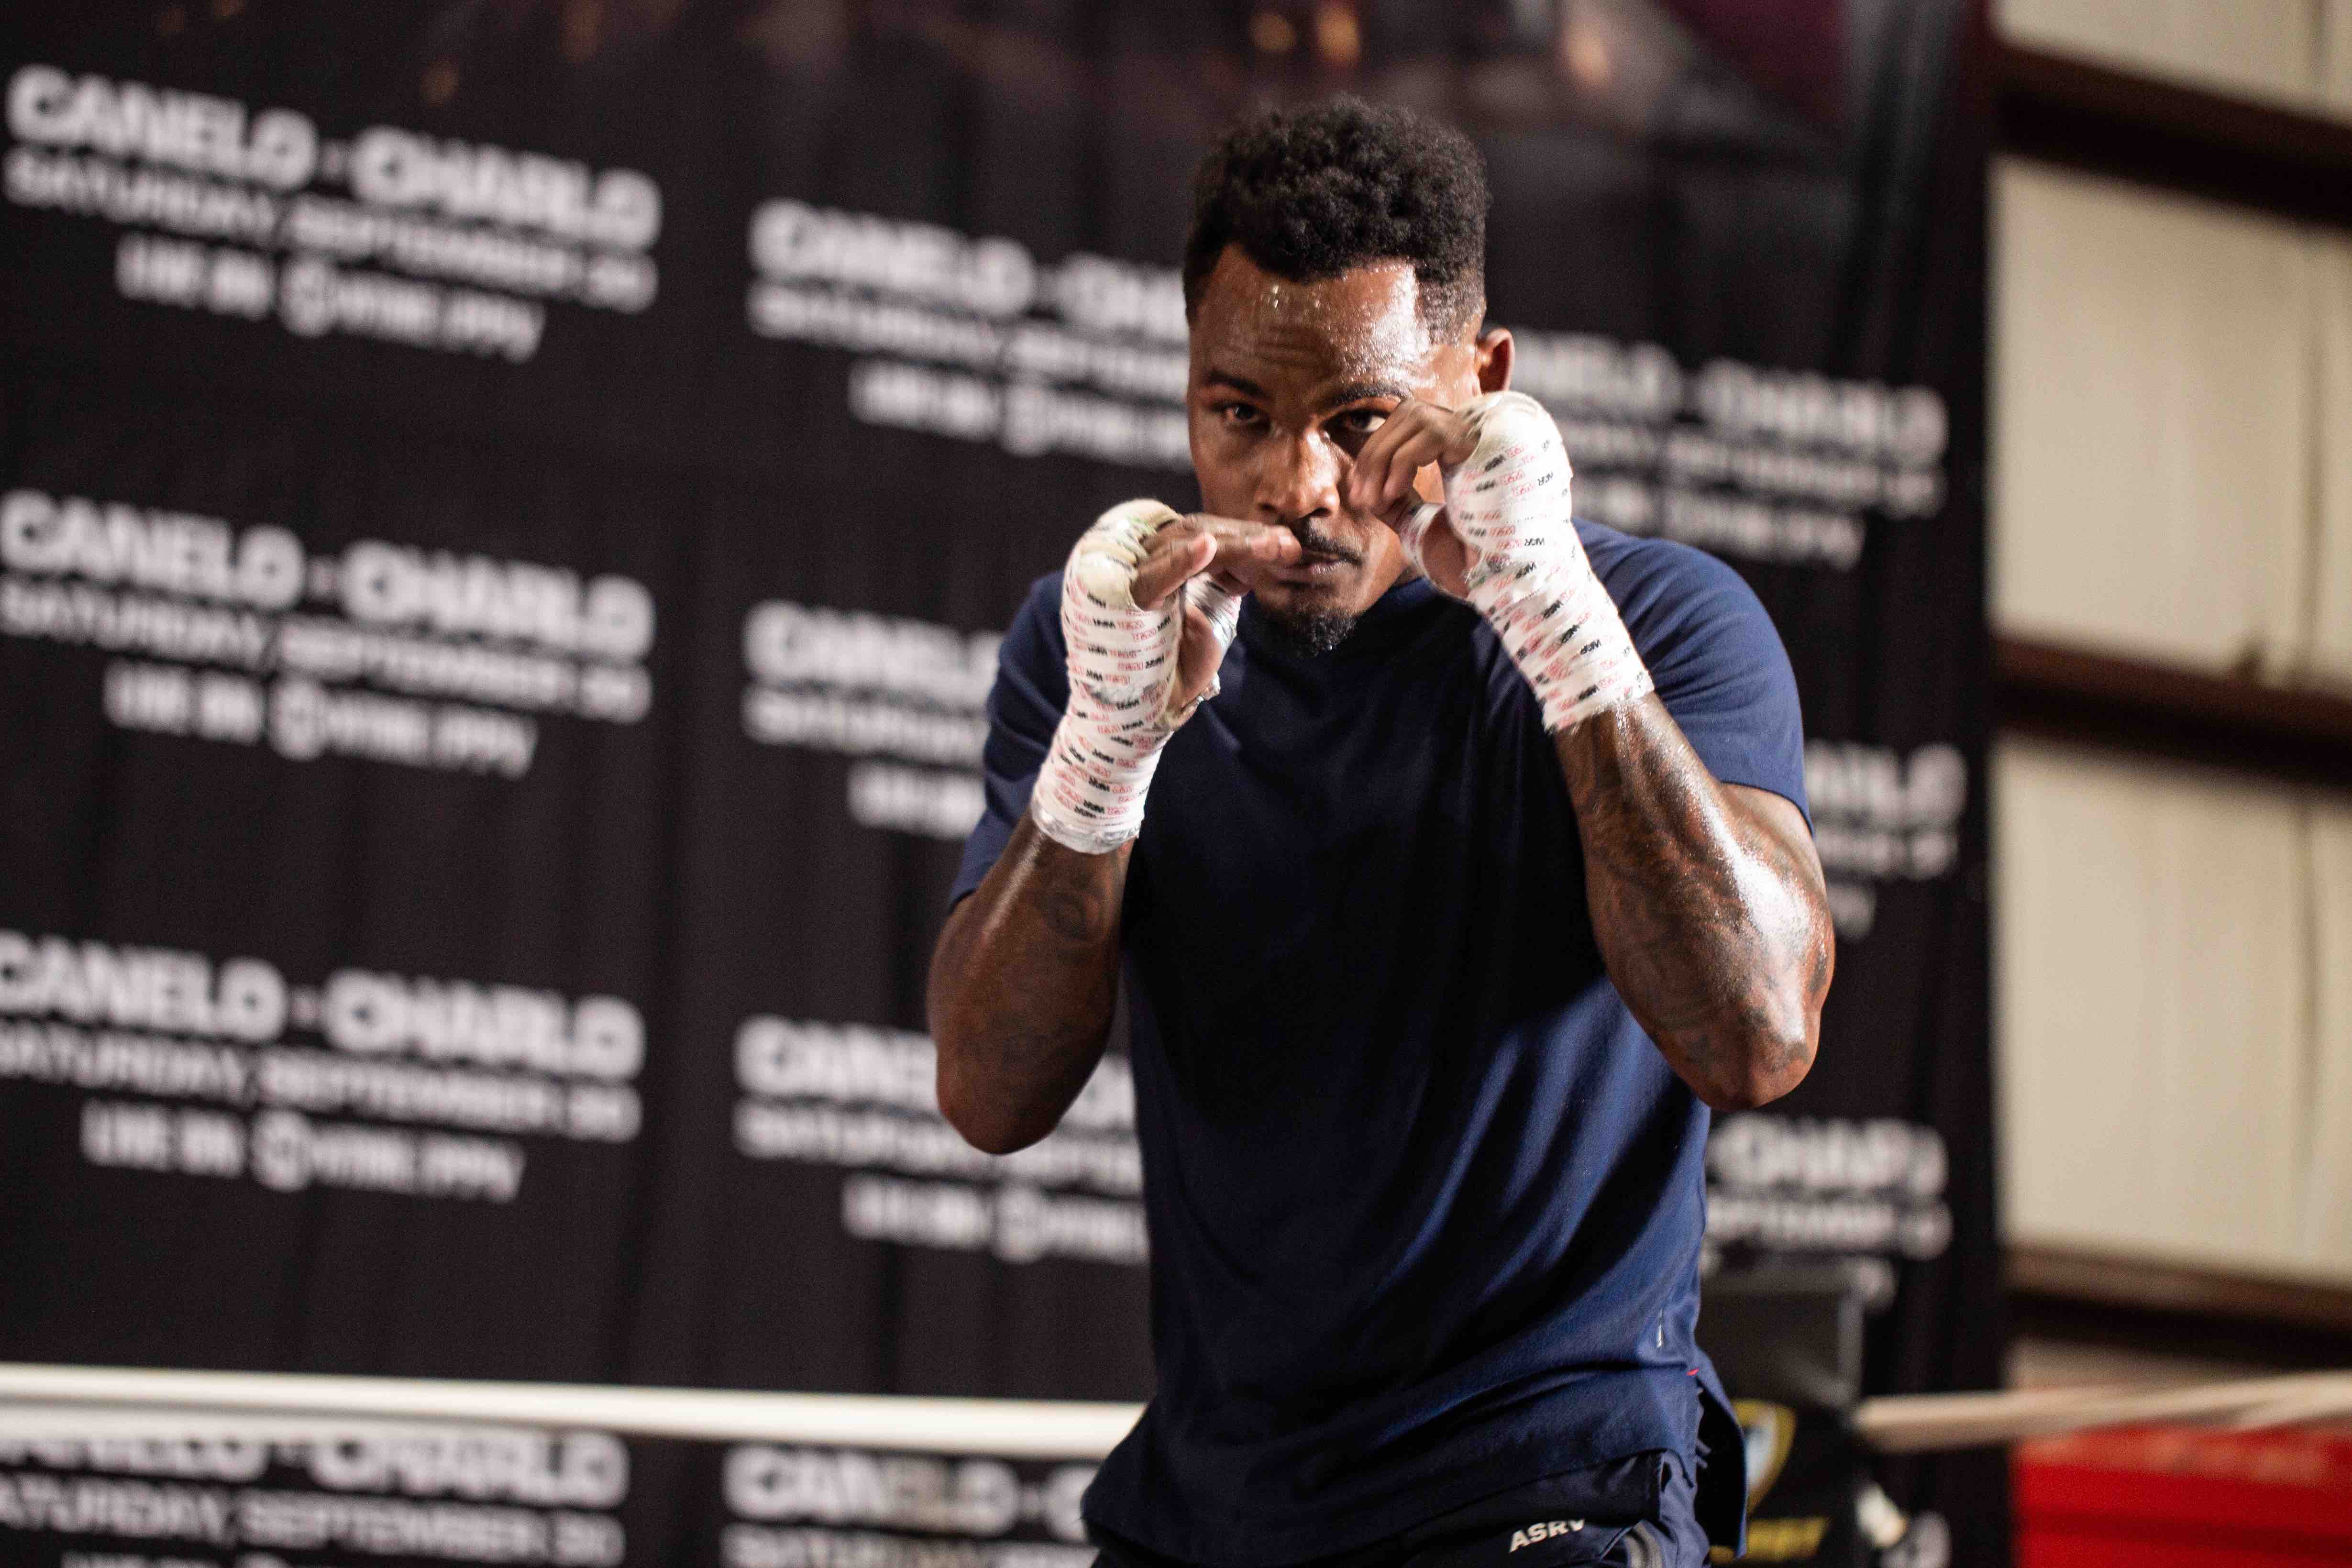 Charlo aims to make history against Canelo